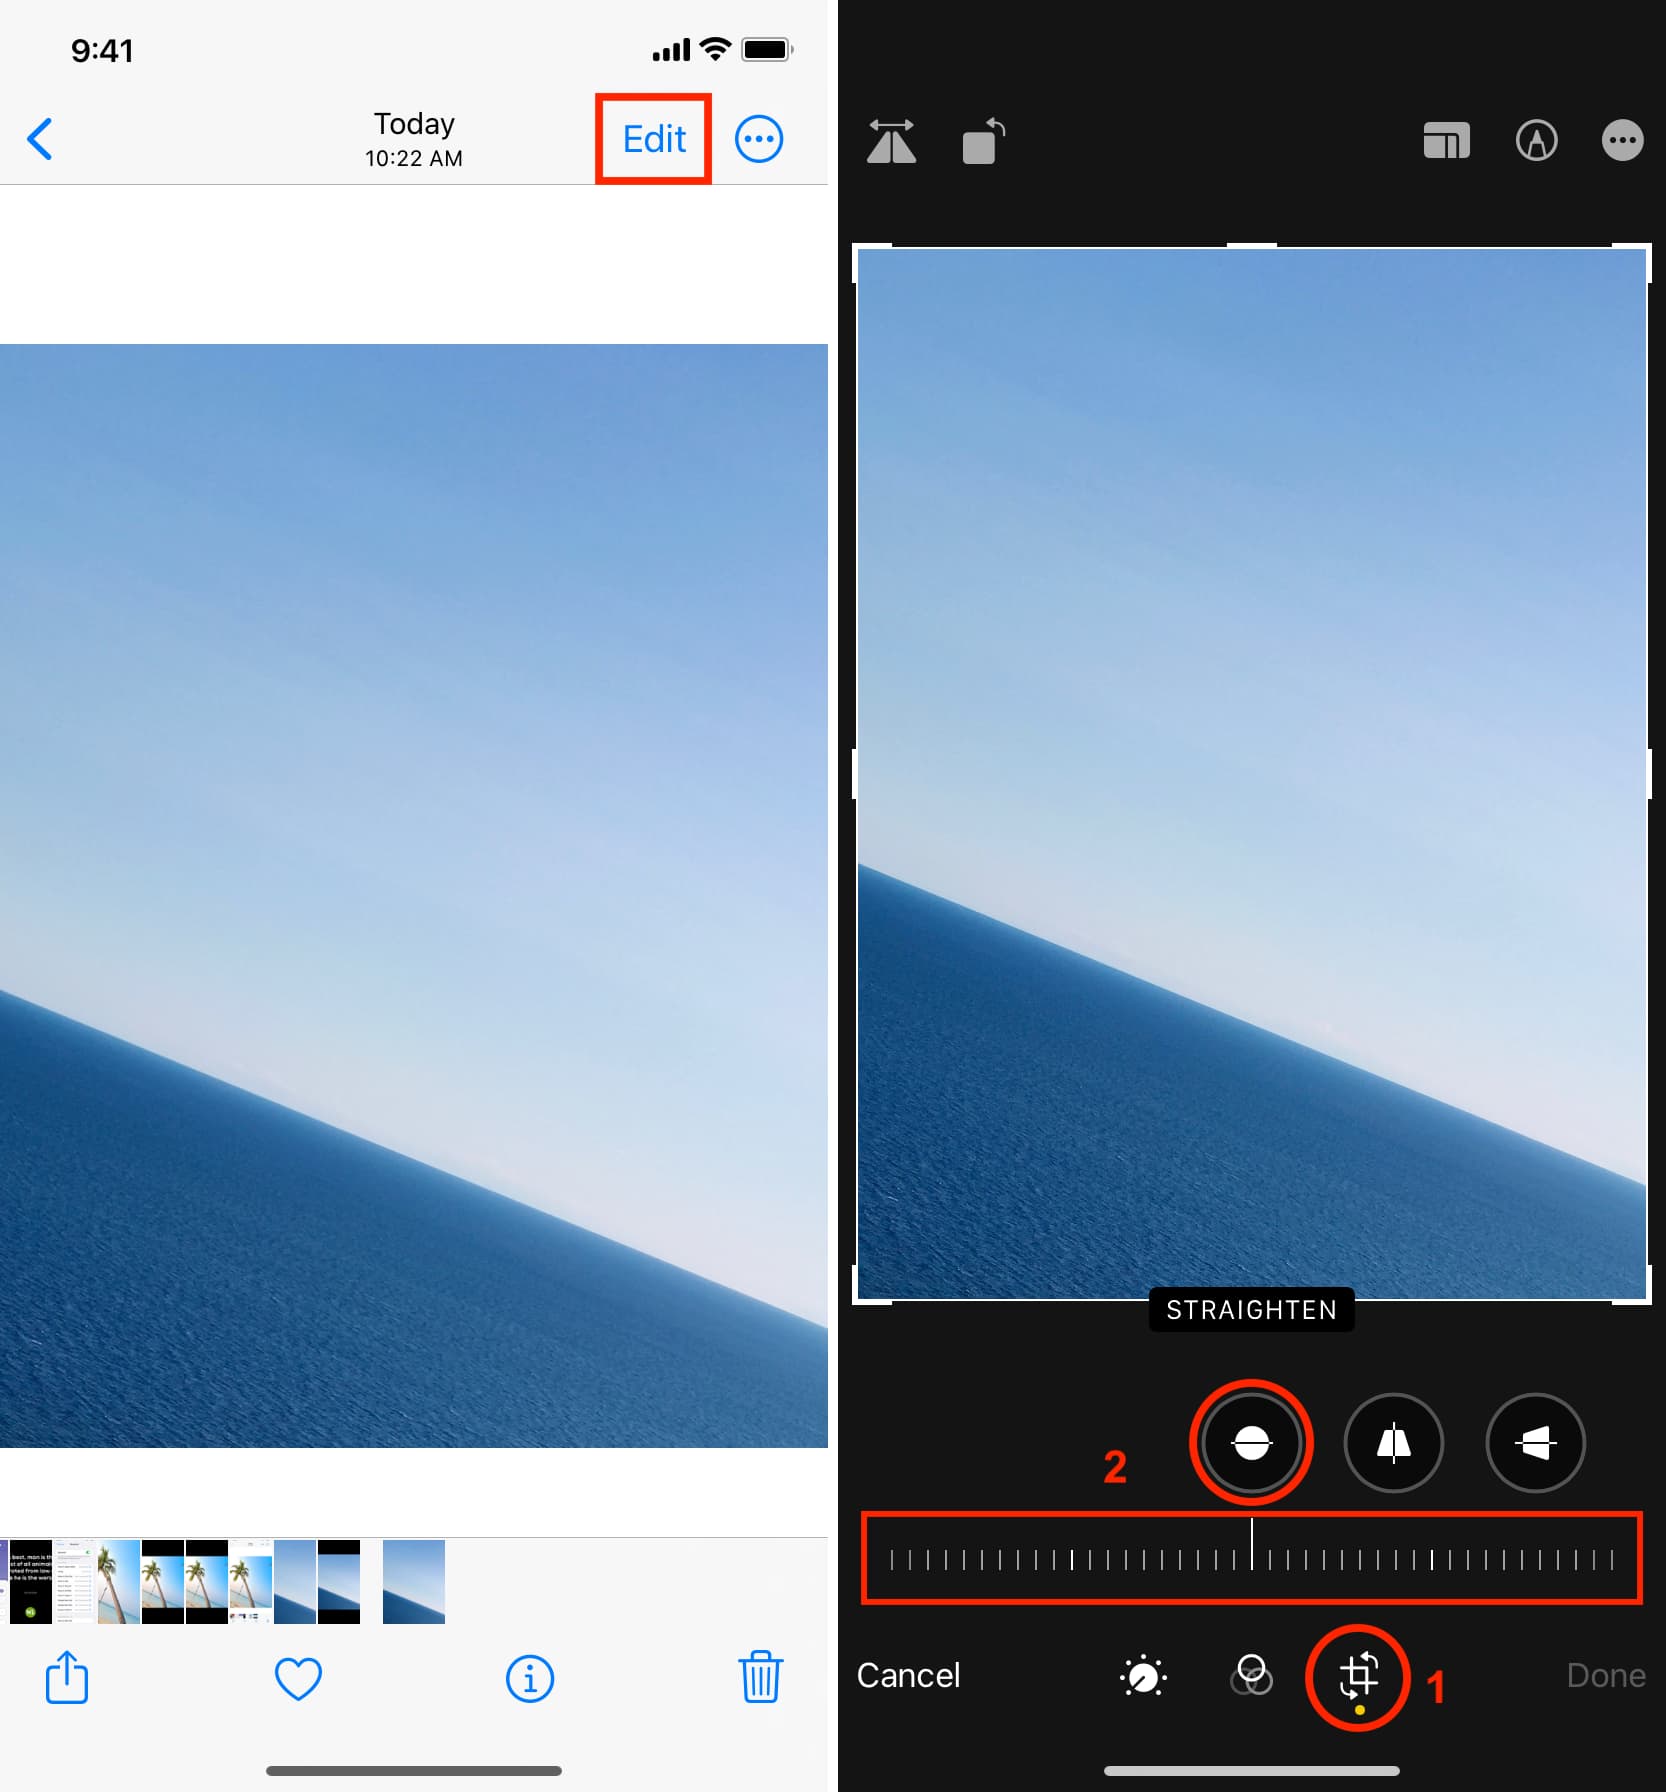 Straighten tool in iPhone Photos app while editing